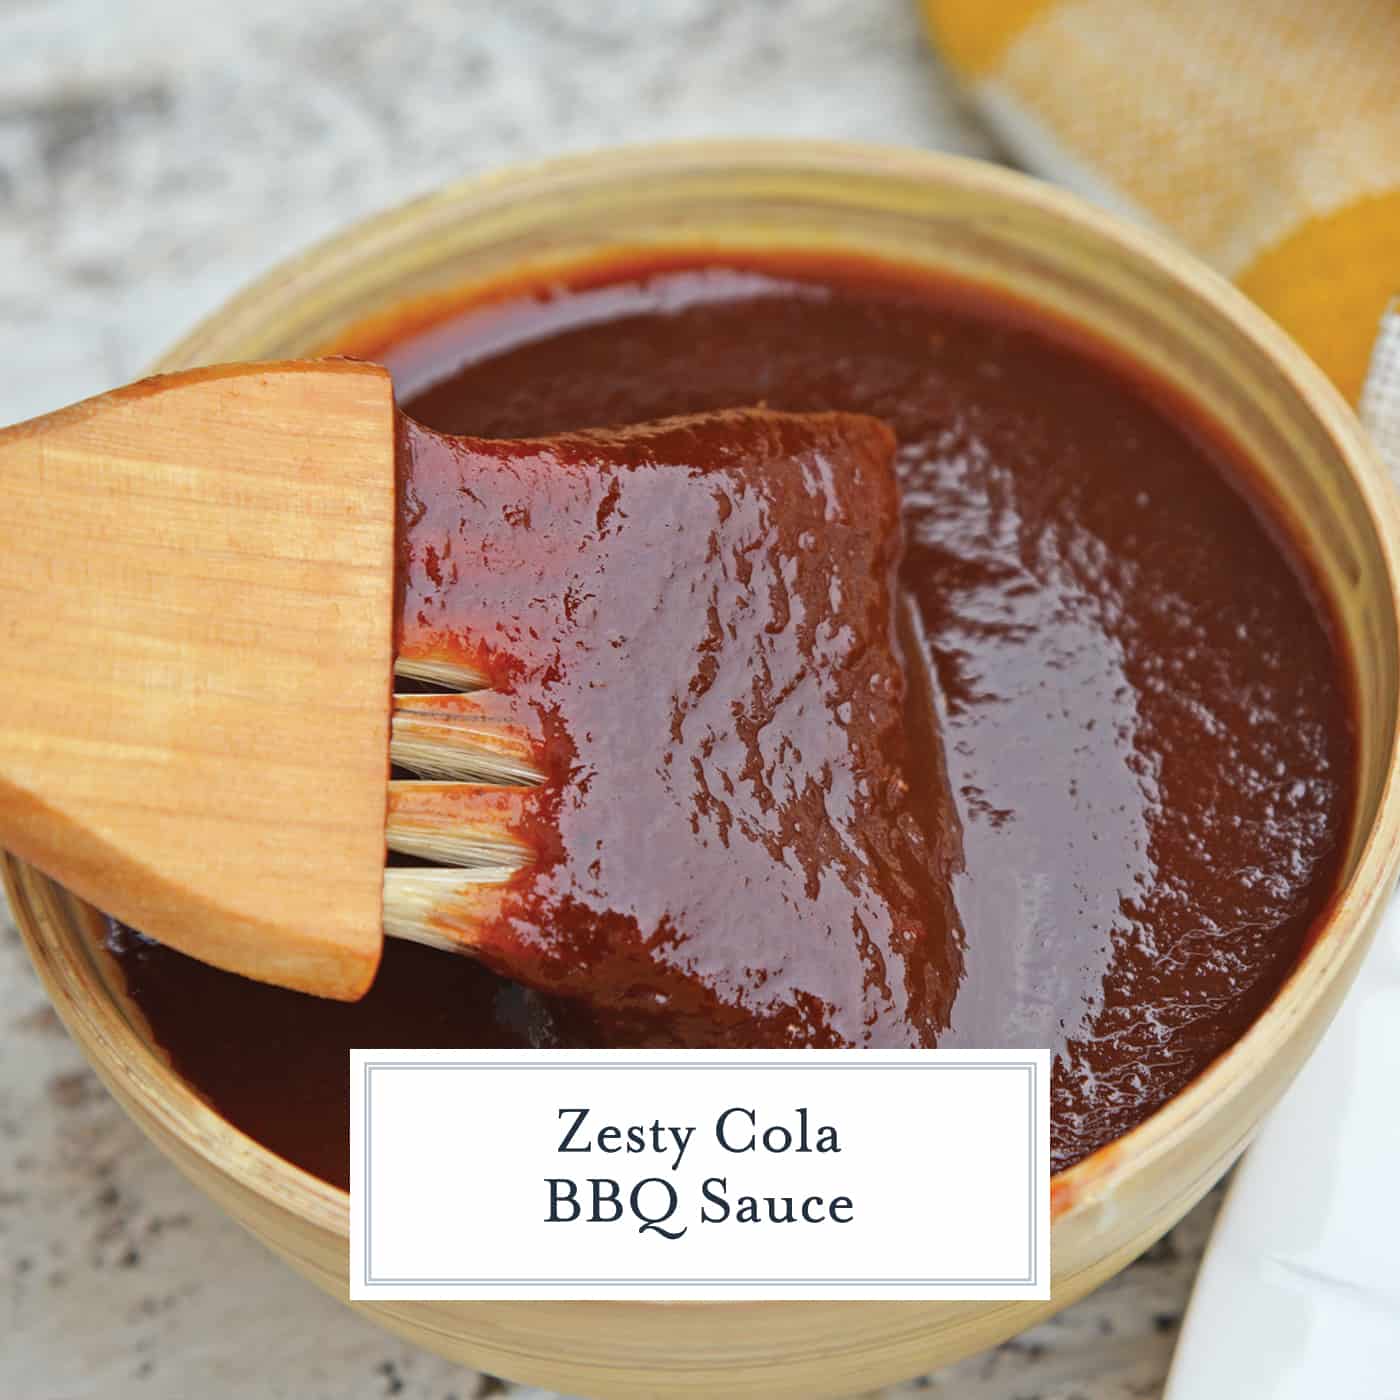 Zesty Cola BBQ Sauce is delicious on anything grilled including chicken, ribs, brisket and pulled pork. It only takes 10 minutes to make! #colabbqsauce #homemadebbqsauce www.savoryexperiments.com